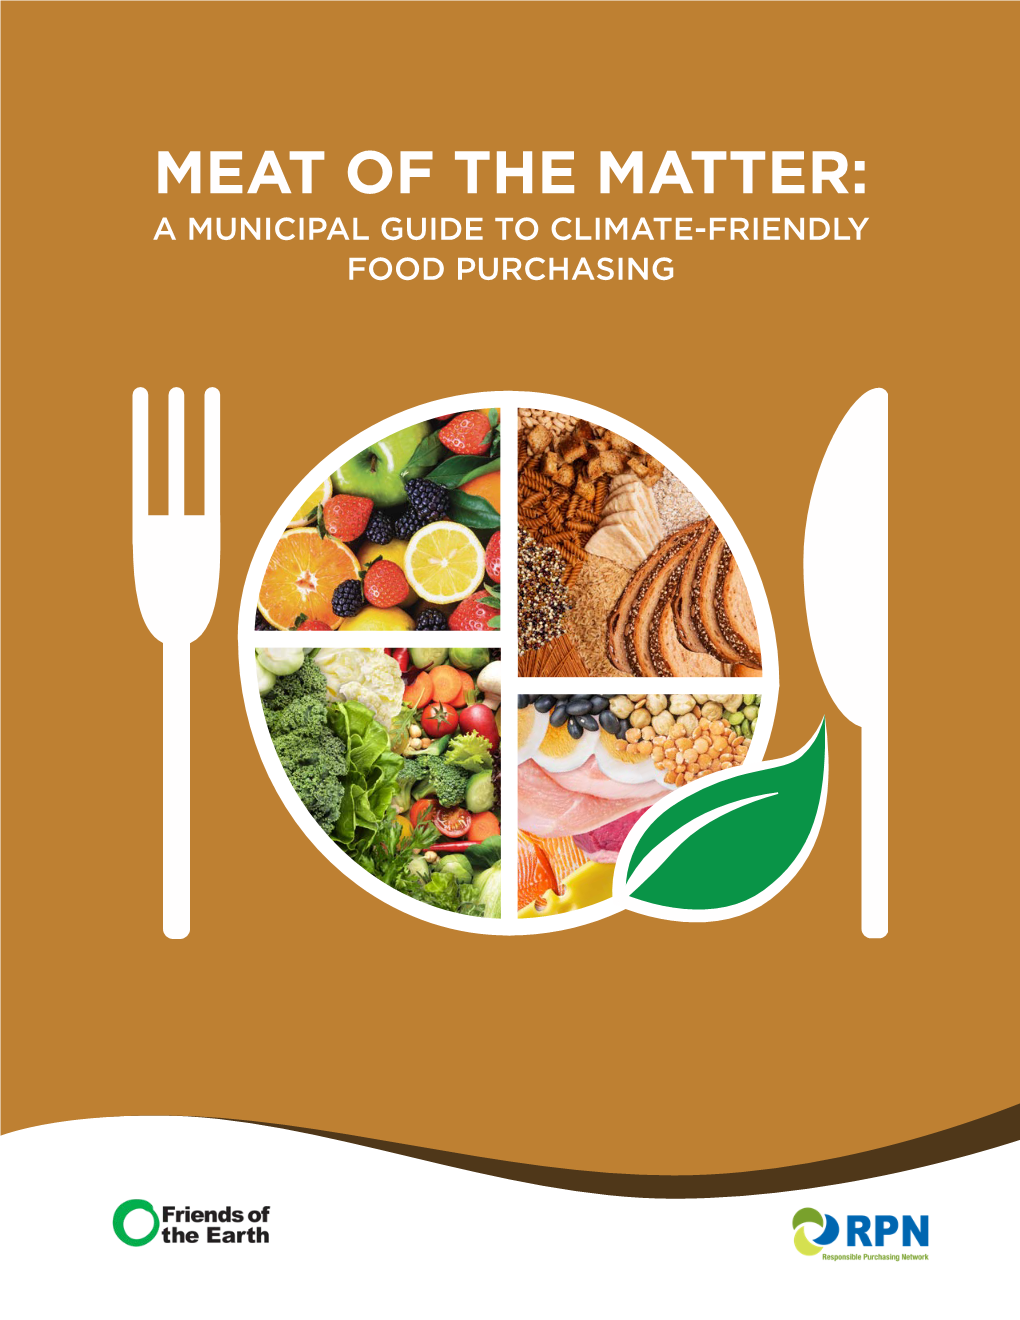 Meat of the Matter 'Municipal Guide to Climate-Friendly Food Purchasing'